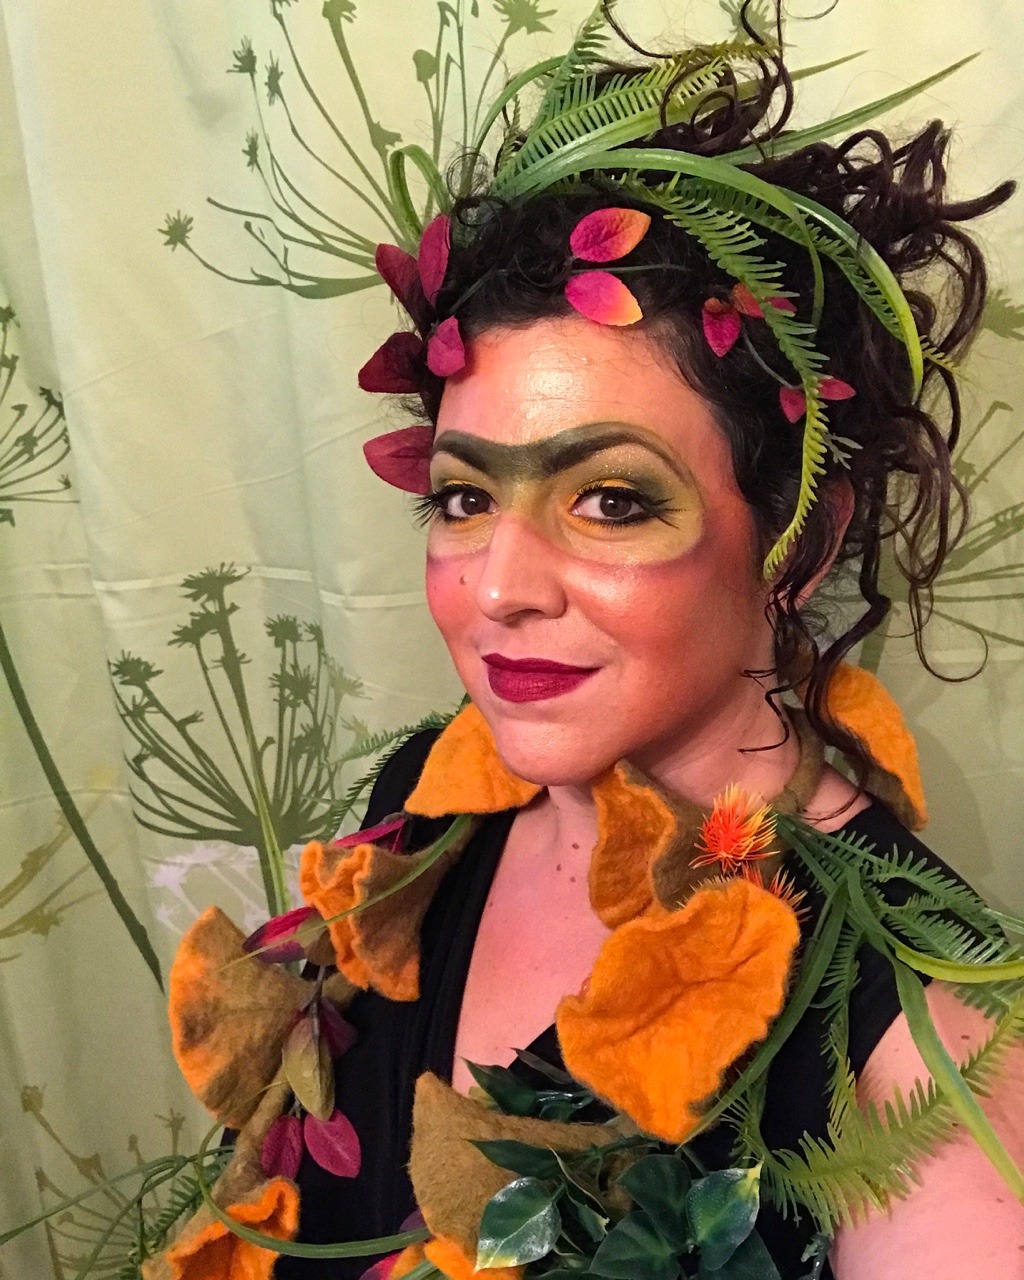 It’s Mardi Gras! Time for costuming, creativity and fun! ⚜️Hair, Makeup and plant-life by me.